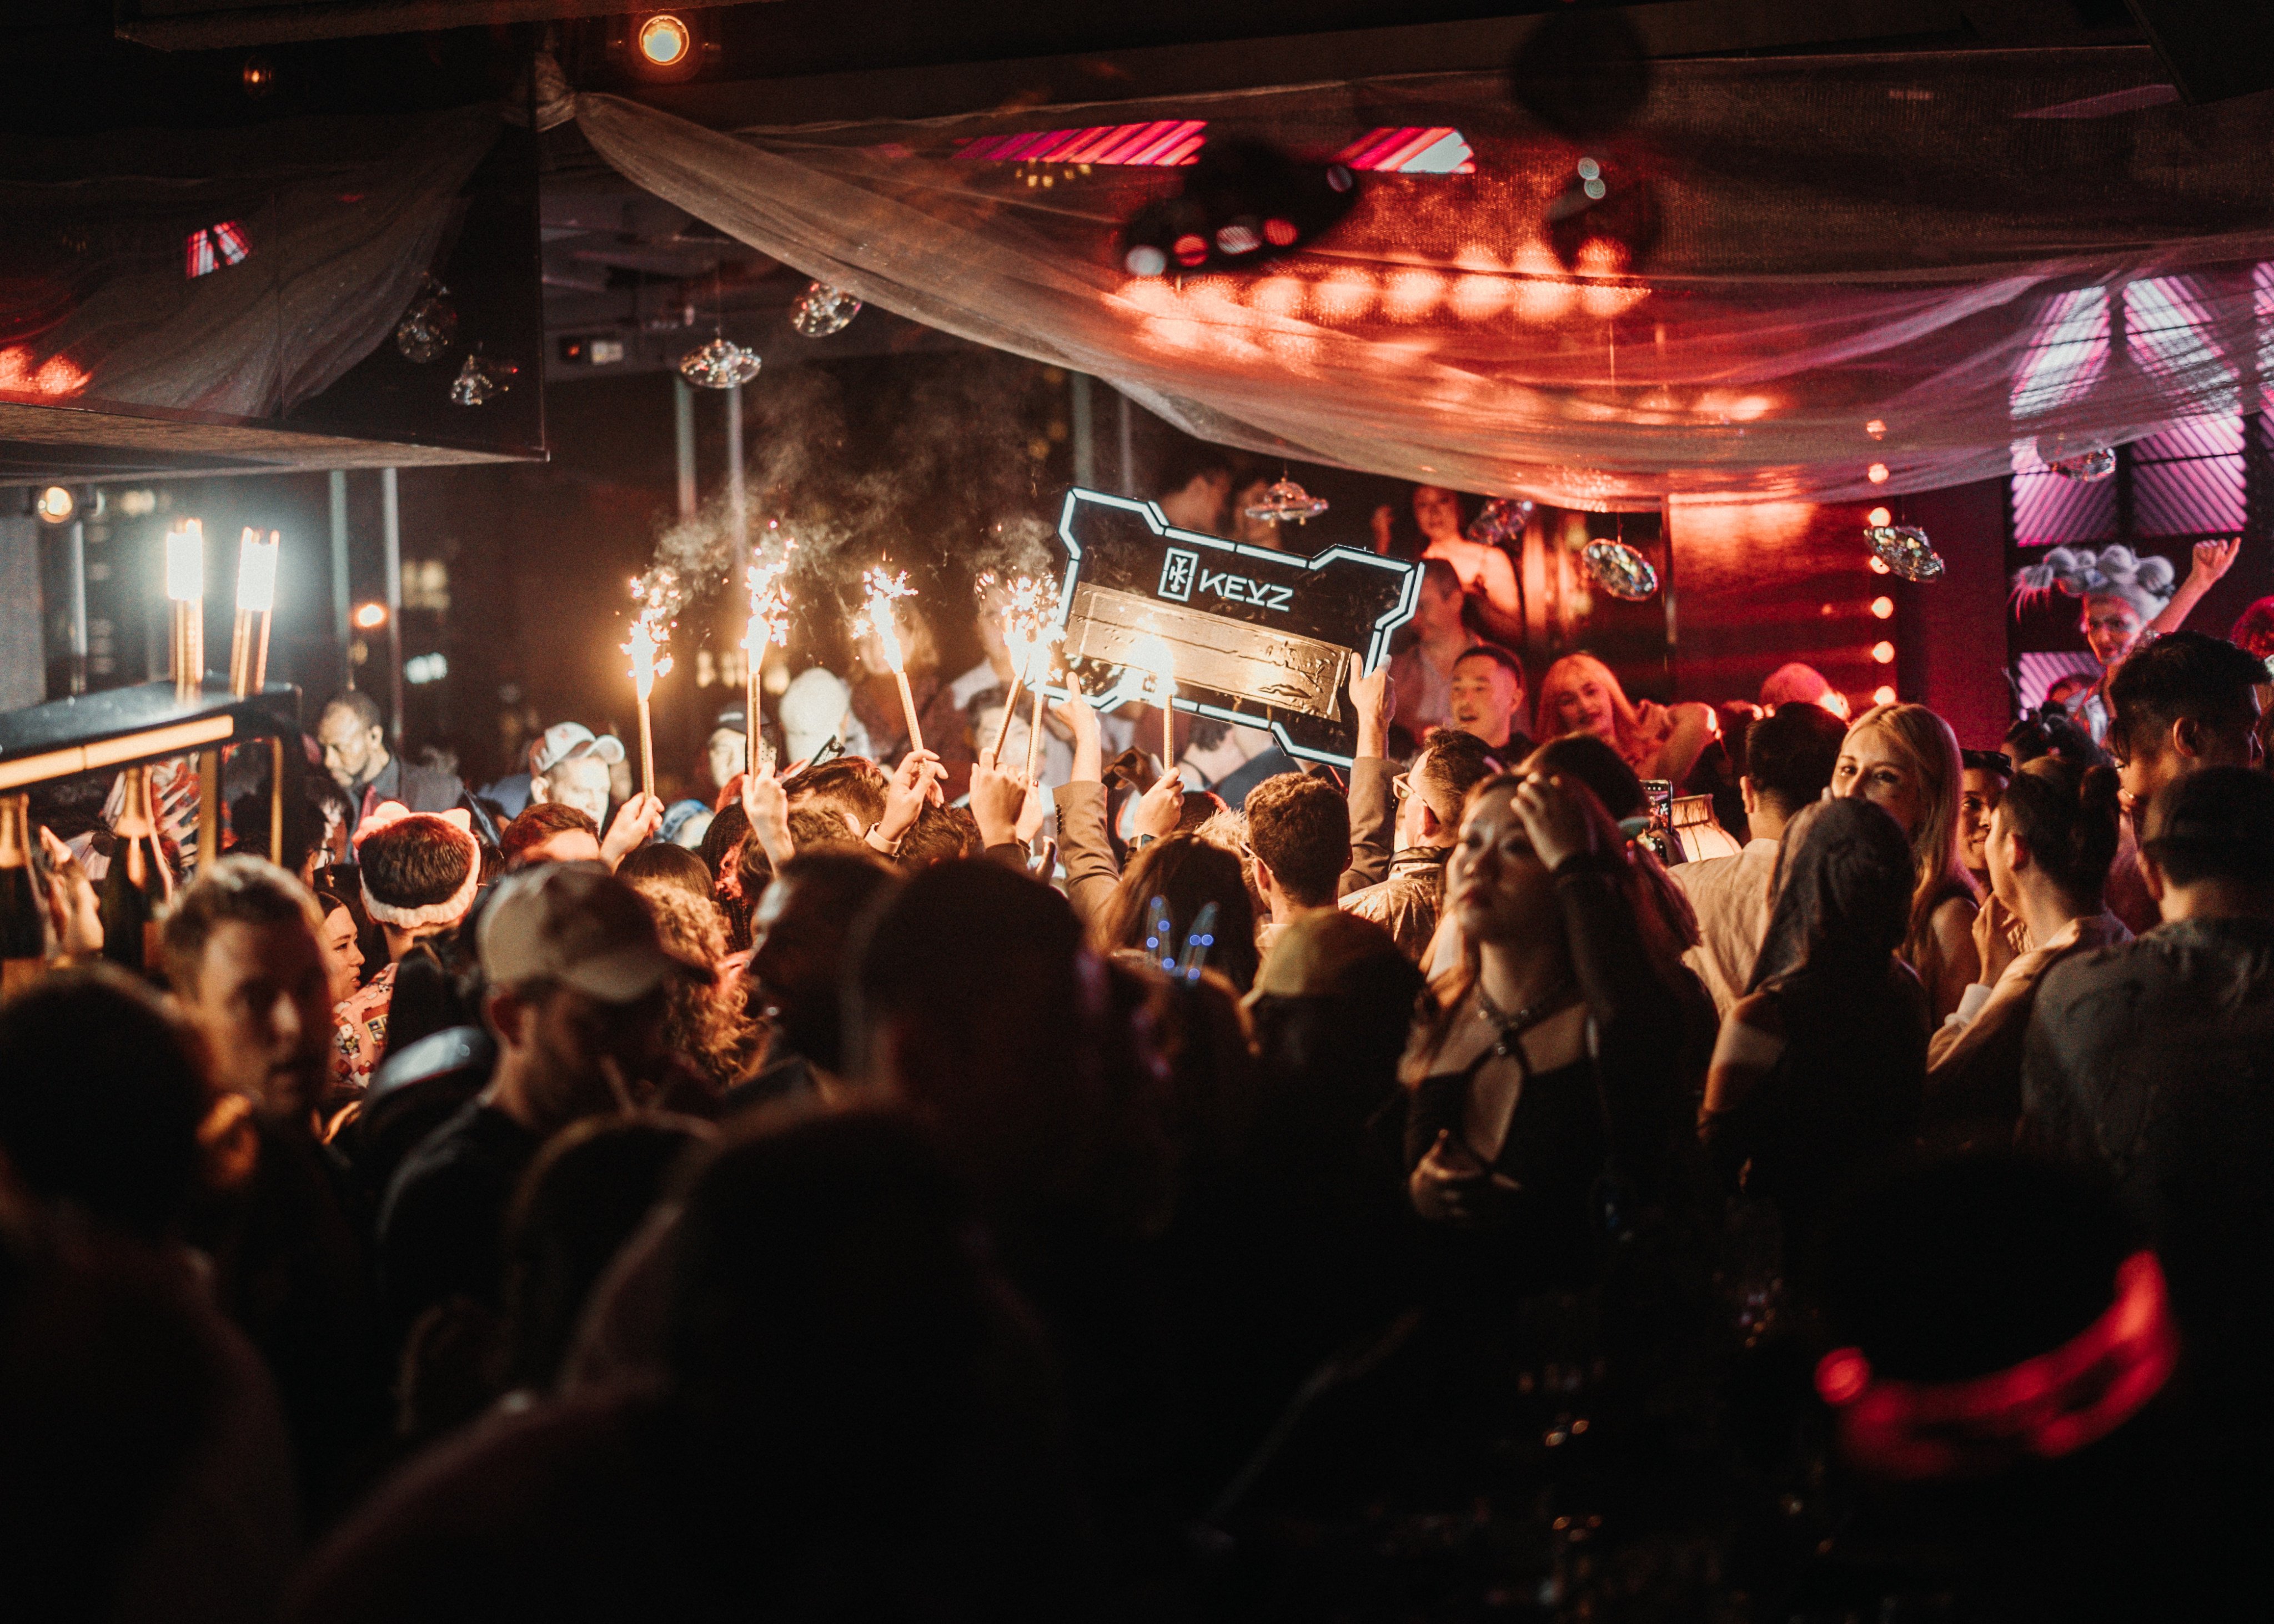 The Keyz nightclub at Trilogy in H Code, Central, is one of your options for seeing in the New Year in Hong Kong. It will be hosting live Afro house music and DJ performances, and will have its own fireworks show. Photo: The Trilogy